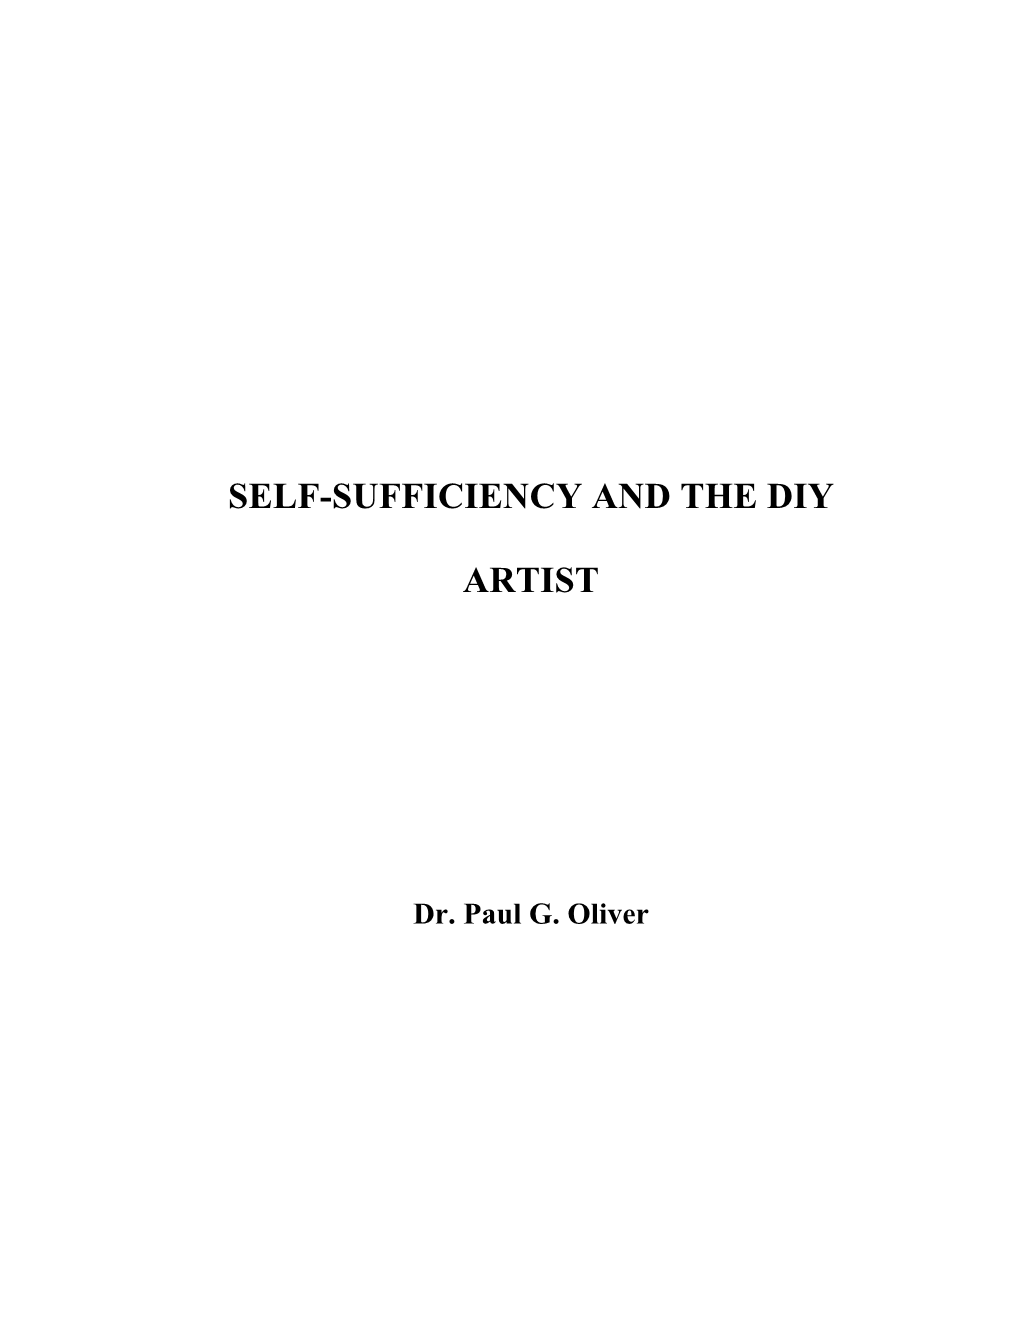 Self-Sufficiency and the Diy Artist